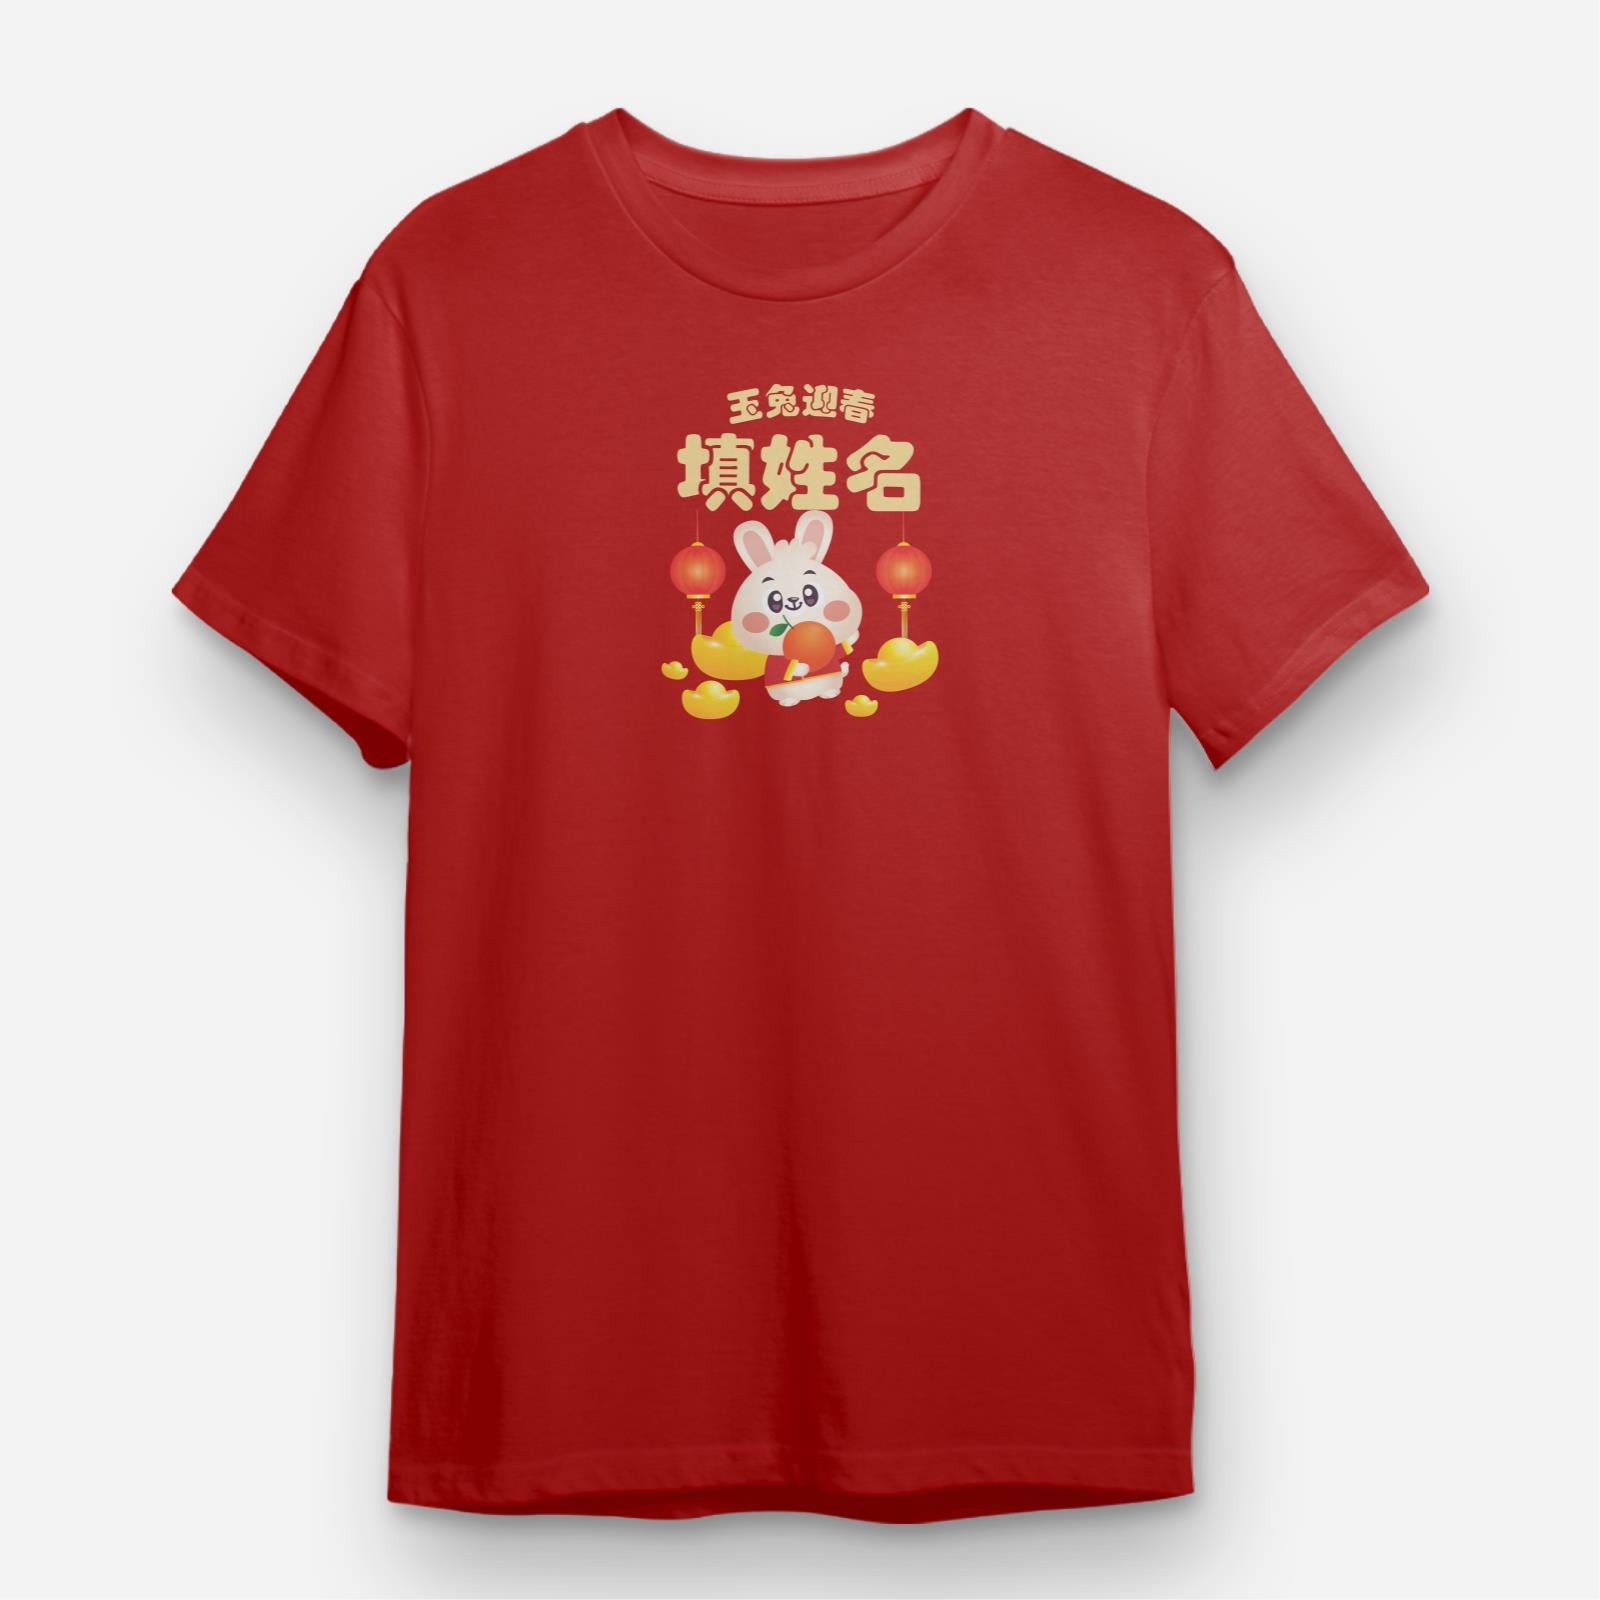 Cny Rabbit Family - Brother Rabbit Unisex Tee Shirt with Chinese Personalization